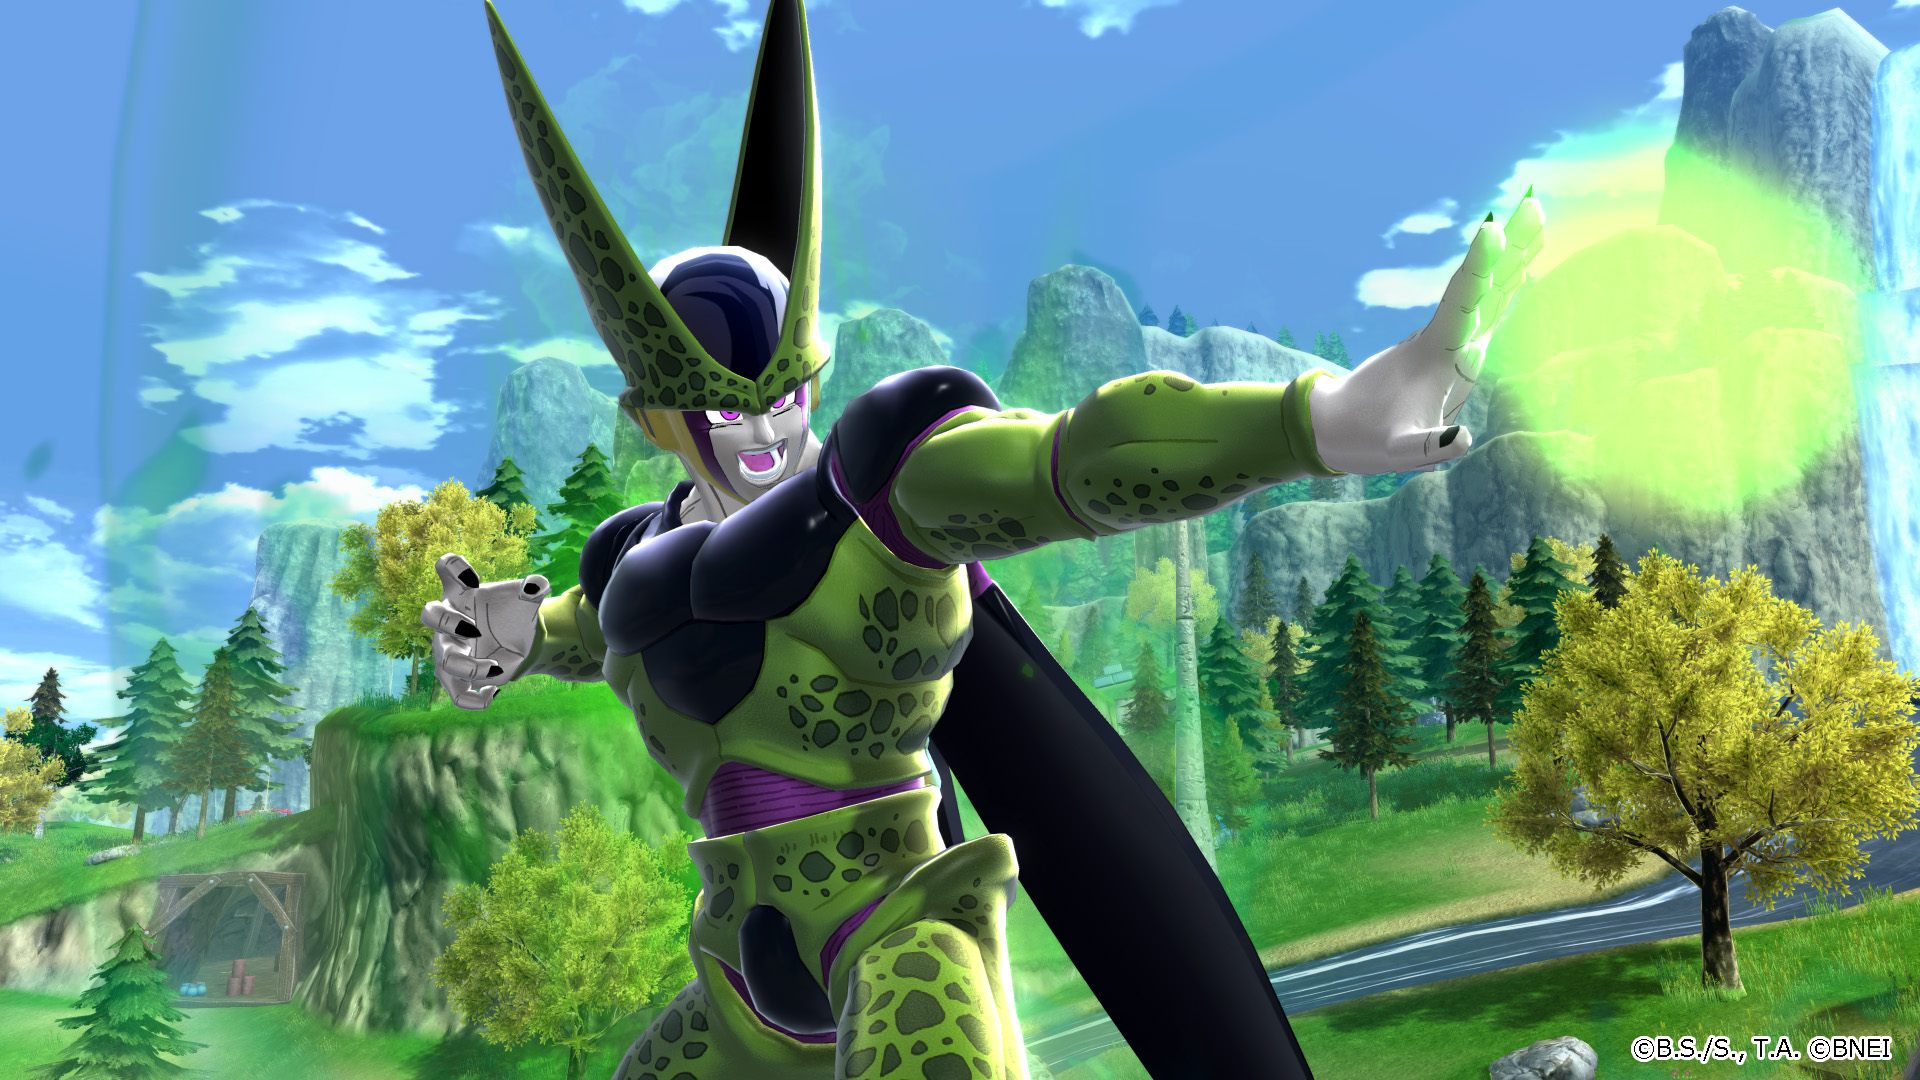 Is Dragon Ball: The Breakers Crossplay? - Dot Esports